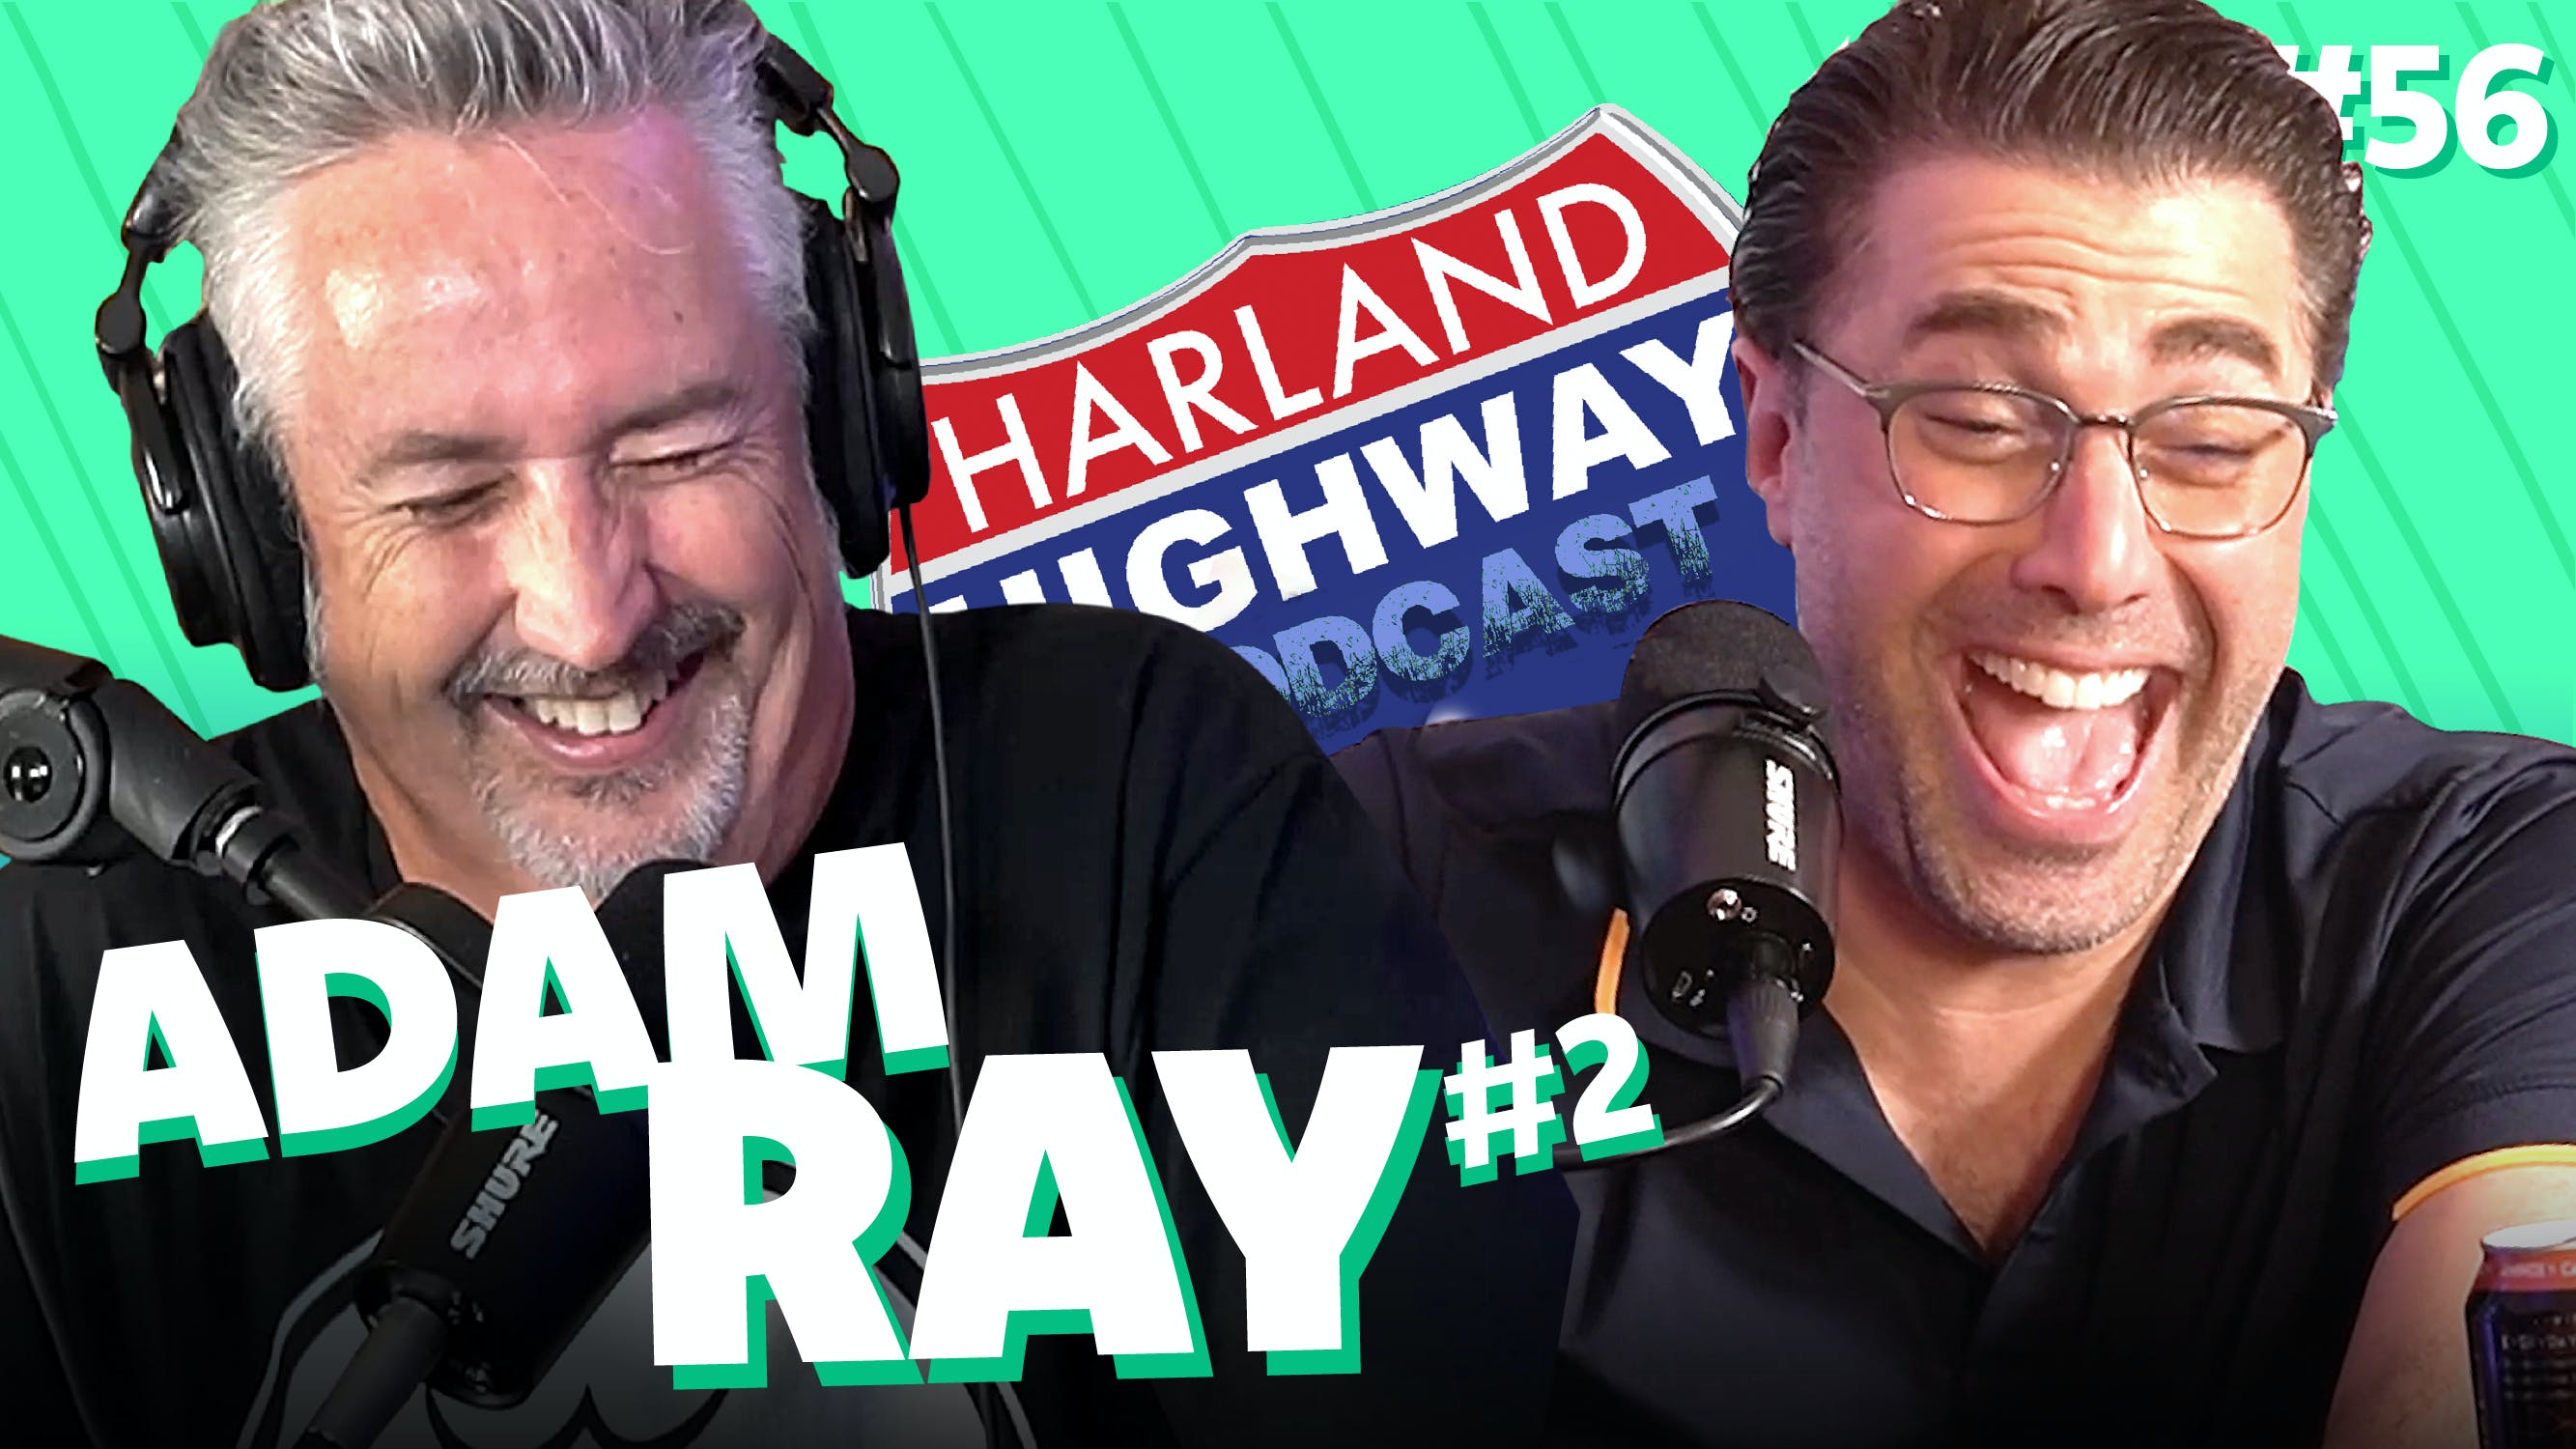 NEW HARLAND HIGHWAY #56 - ADAM RAY, Comedian, Actor, Podcaster.